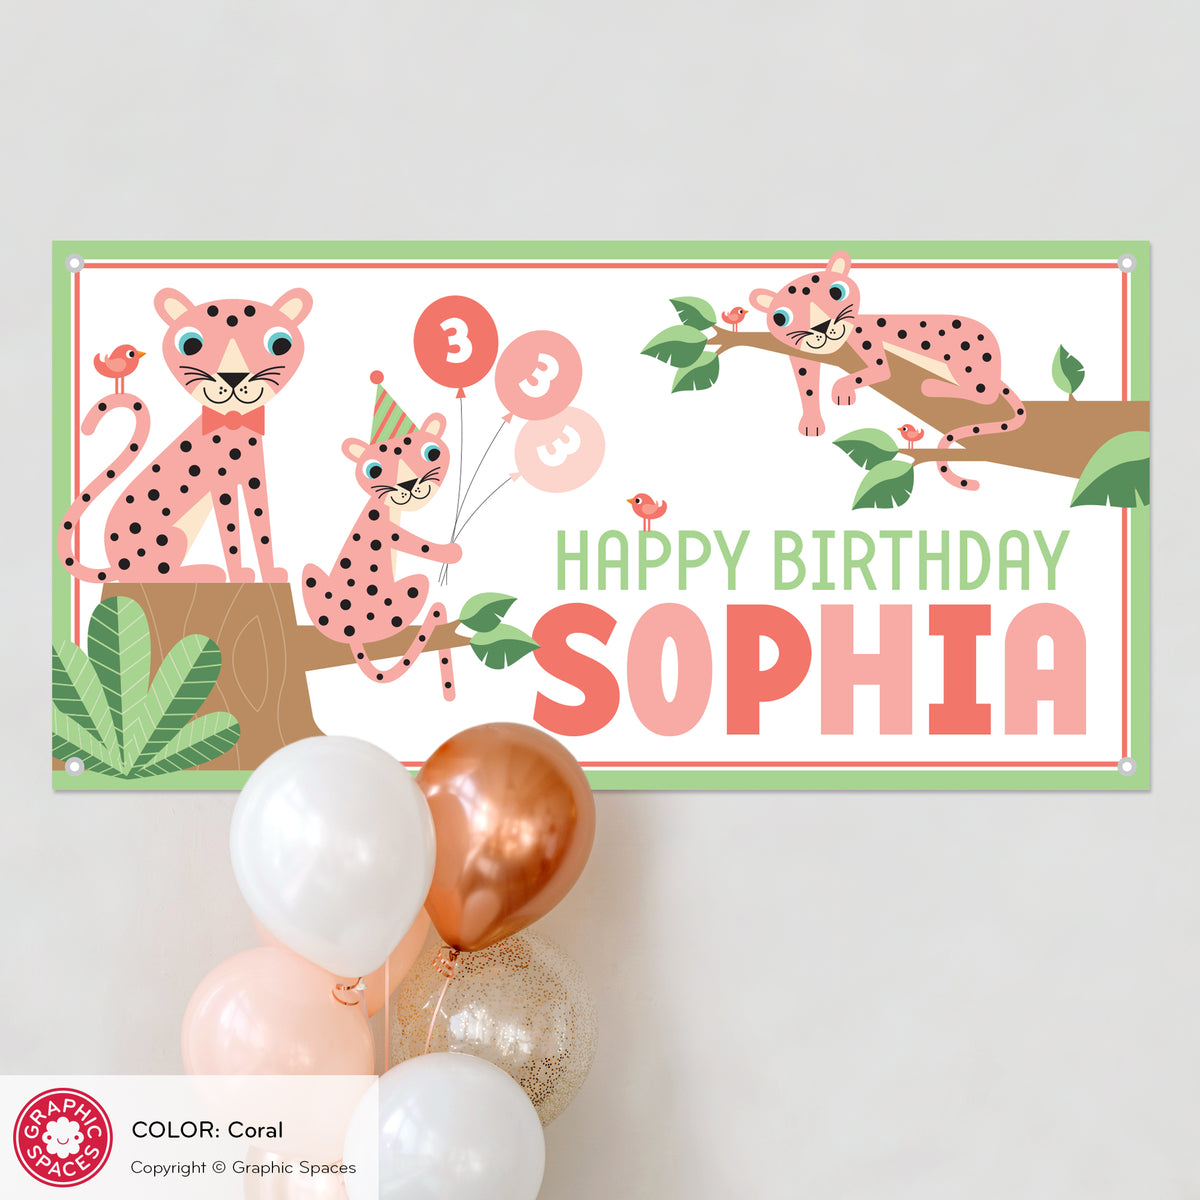 Cheetah Birthday Party Banner, Personalized - CORAL